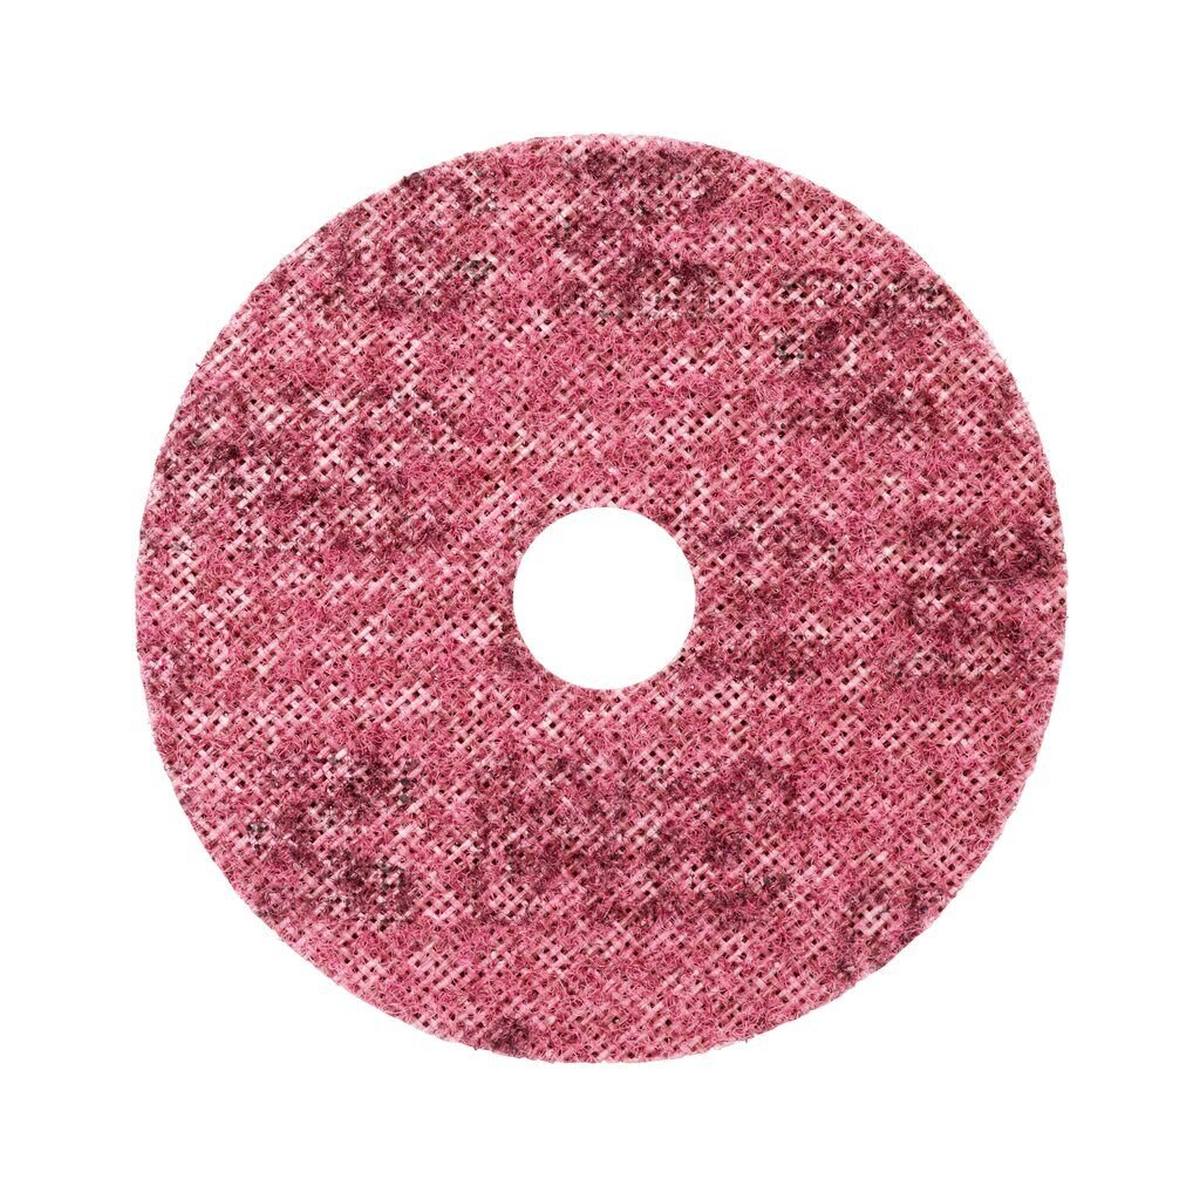 3M Scotch-Brite Non-woven disc SC-DH with centring, red, 115 mm, 22 mm, A, medium #60982